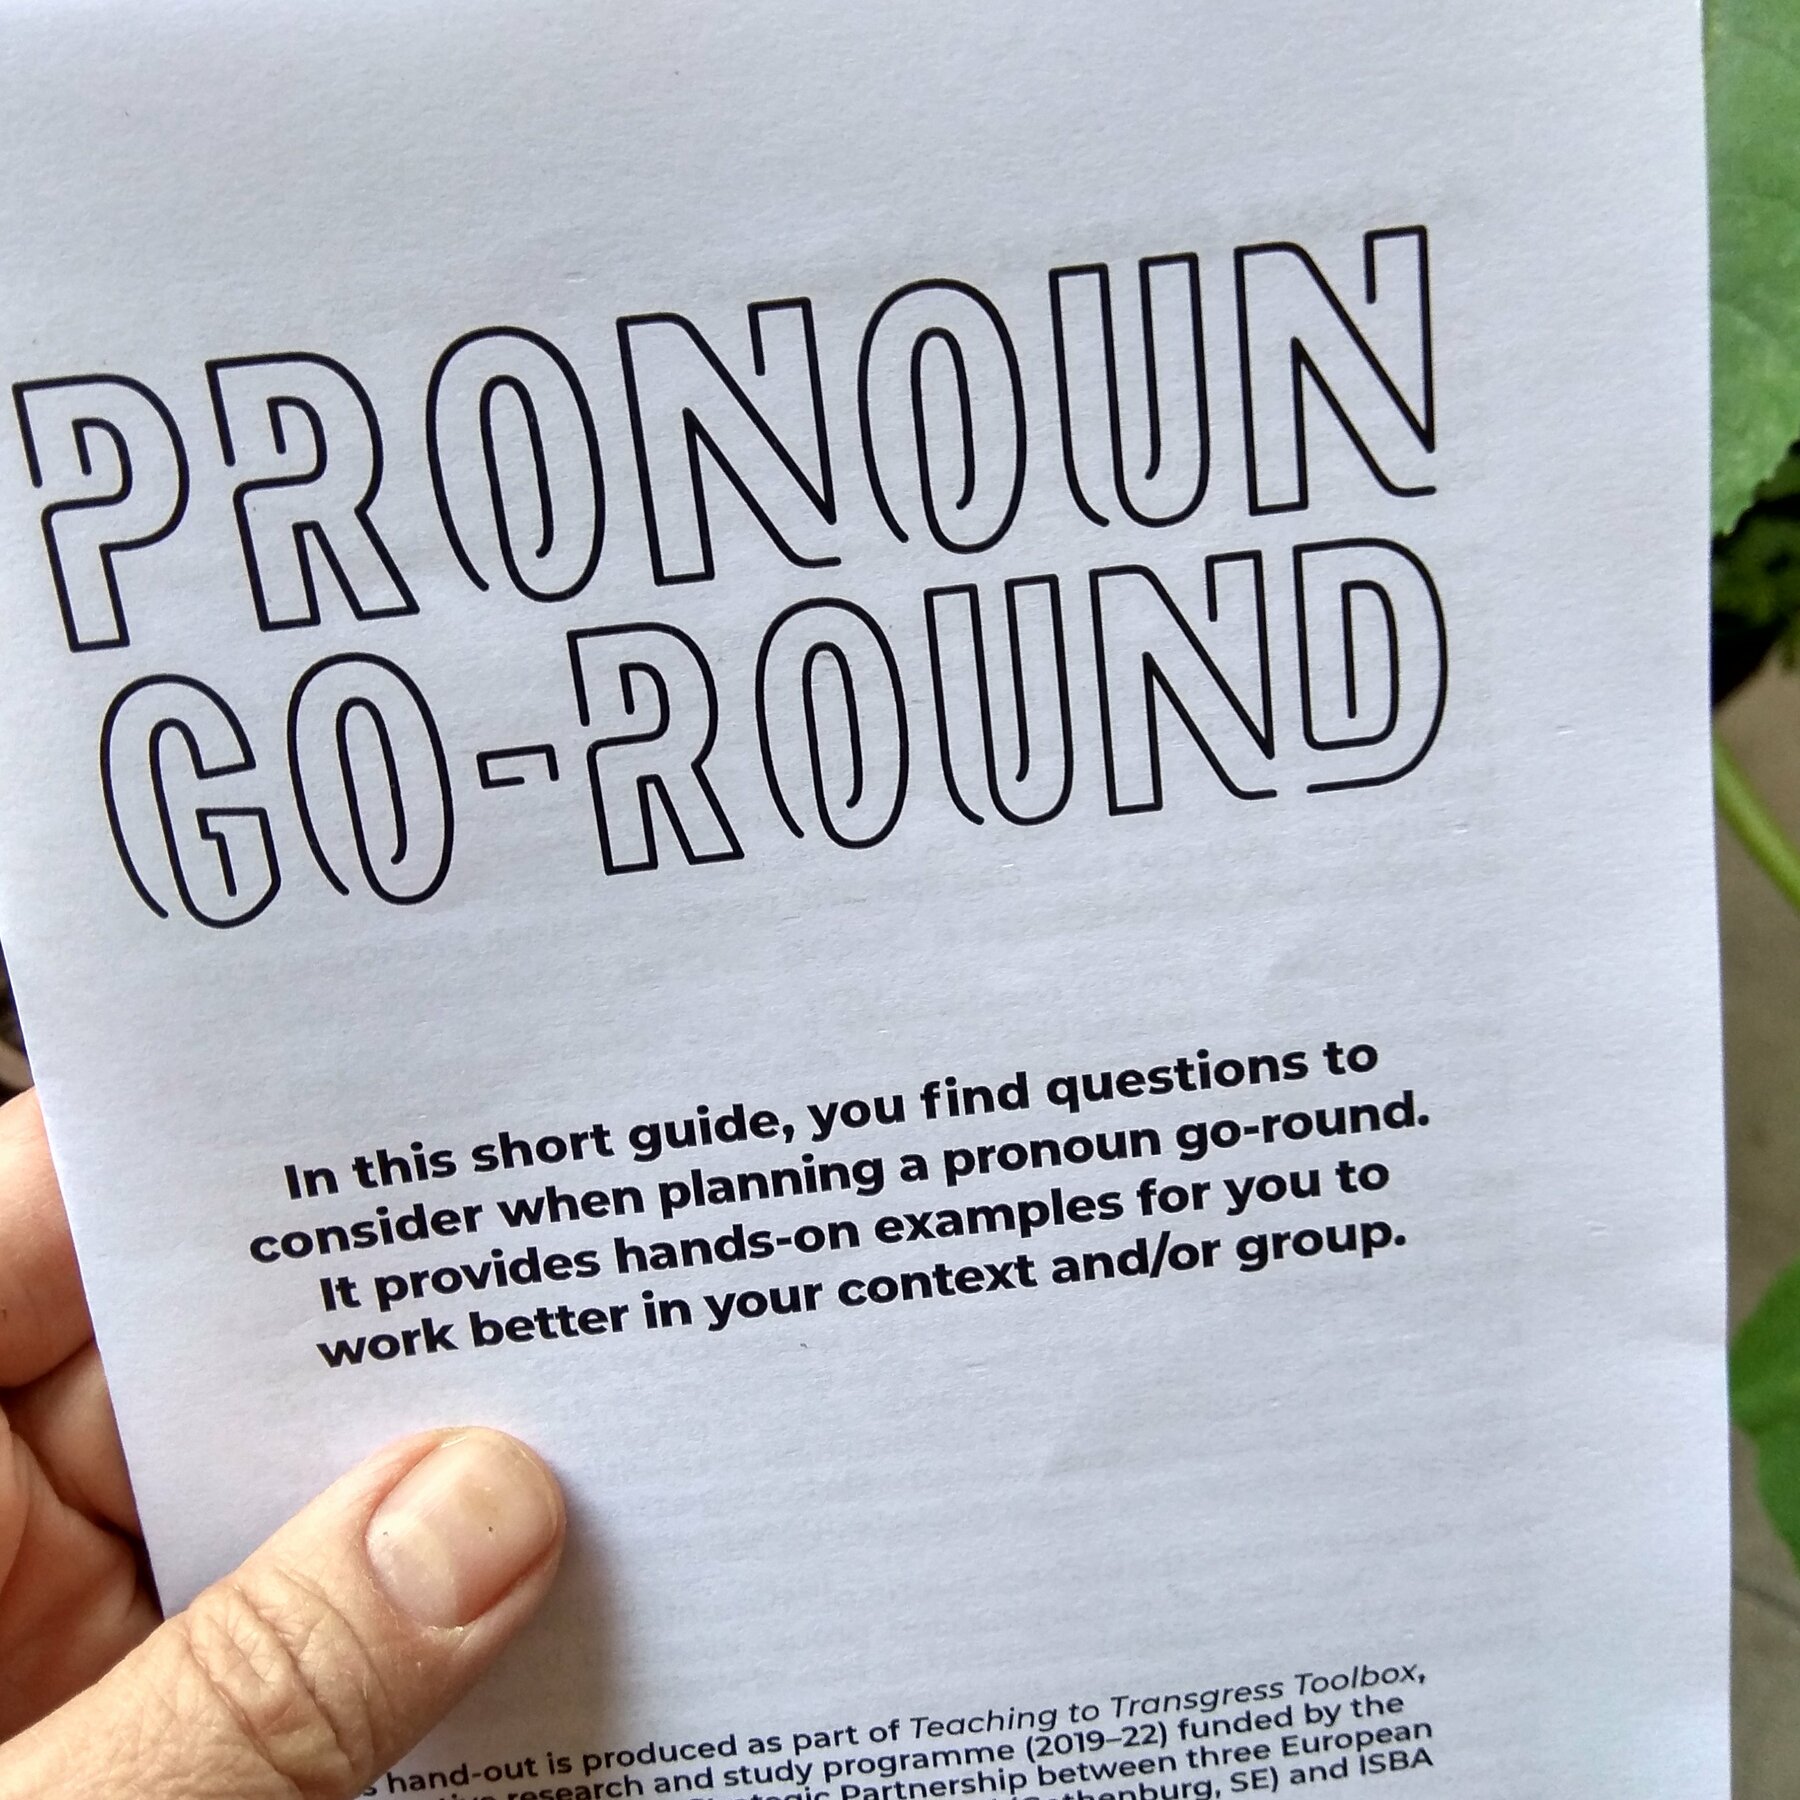 A photograph of a hand holding the printed zine *Pronoun Go-Round Guide*.